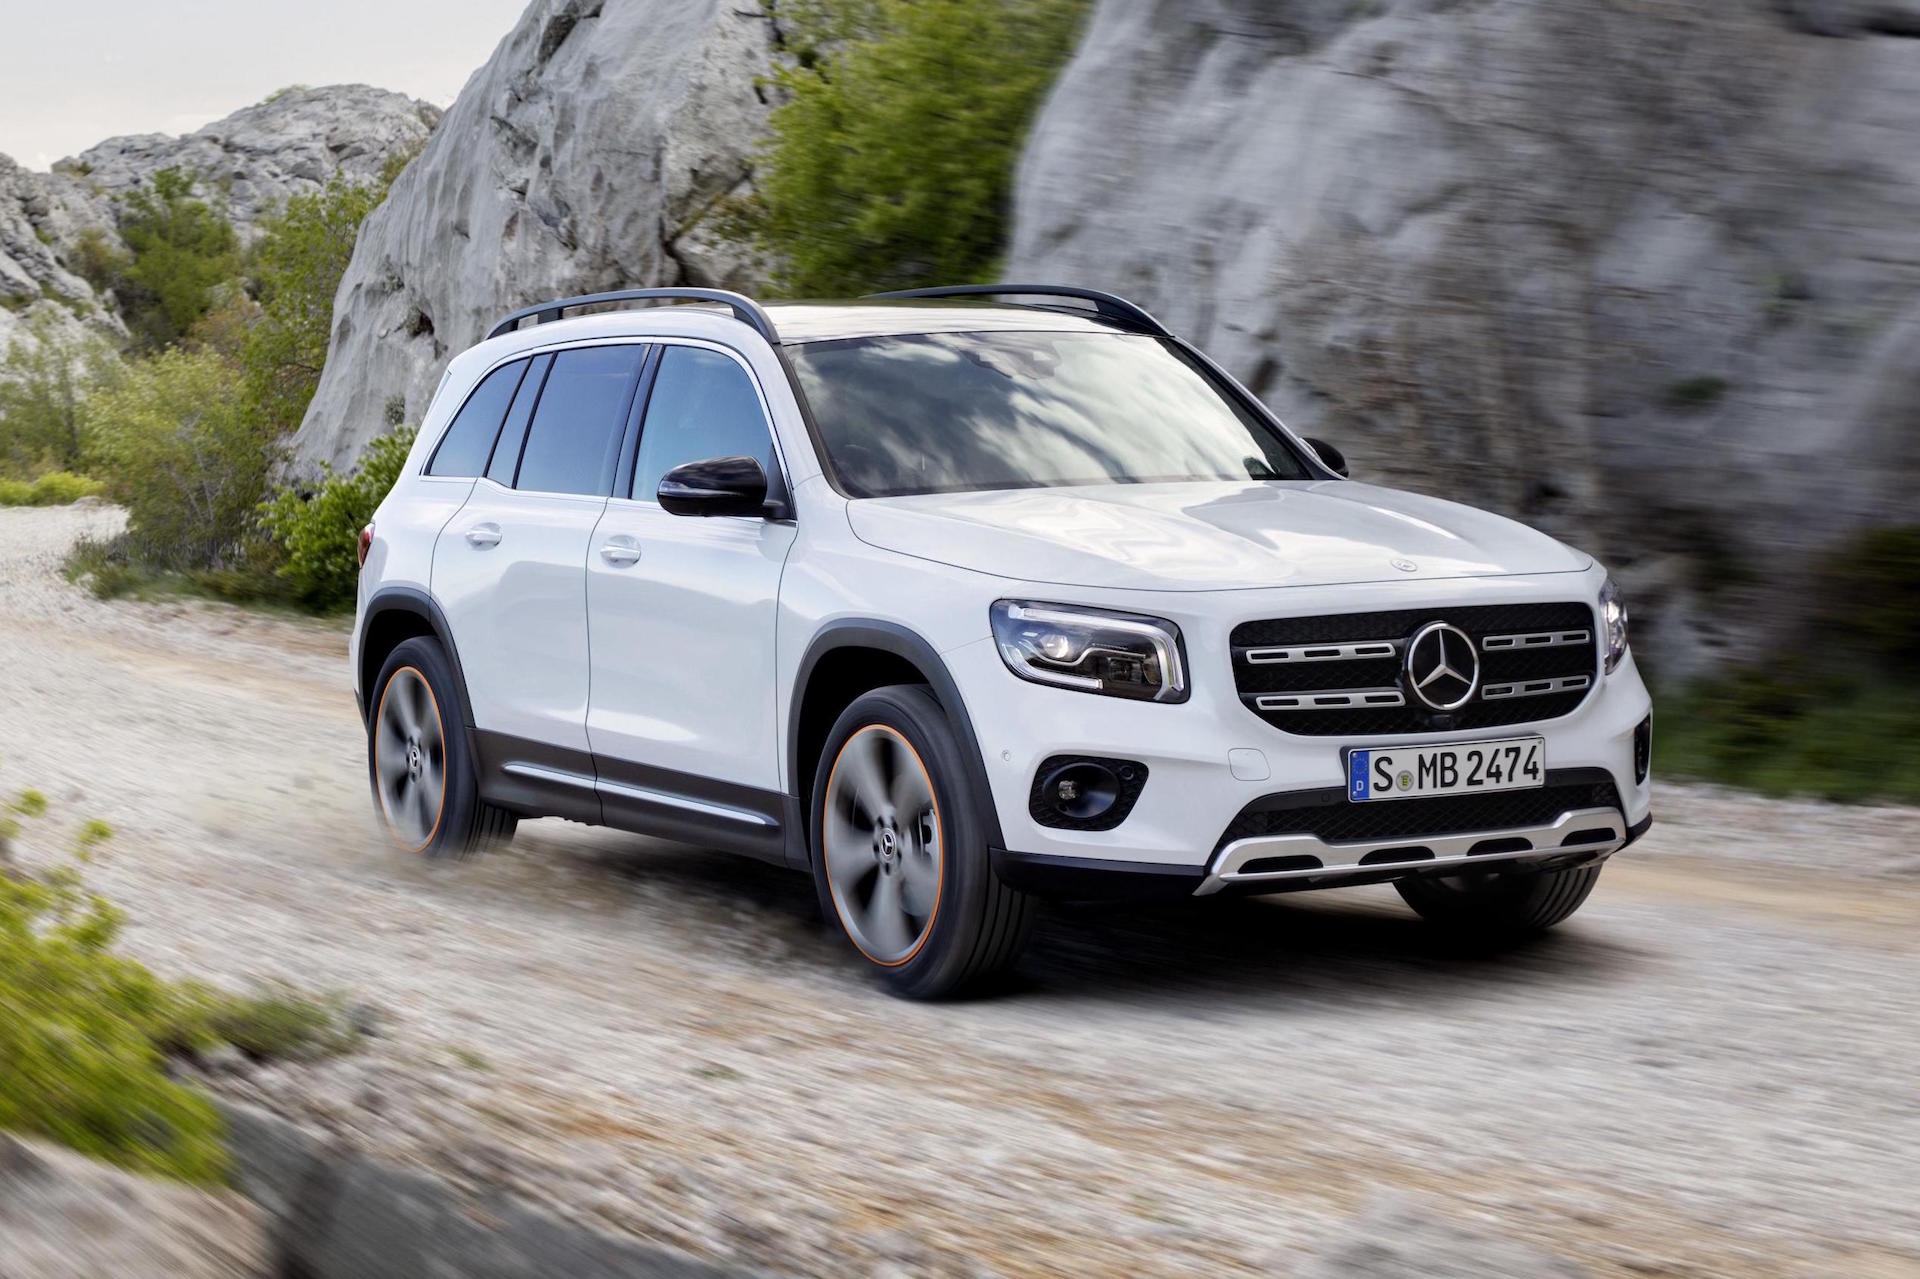 2020 Mercedes Benz Glb Revealed As New 7 Seat Compact Suv